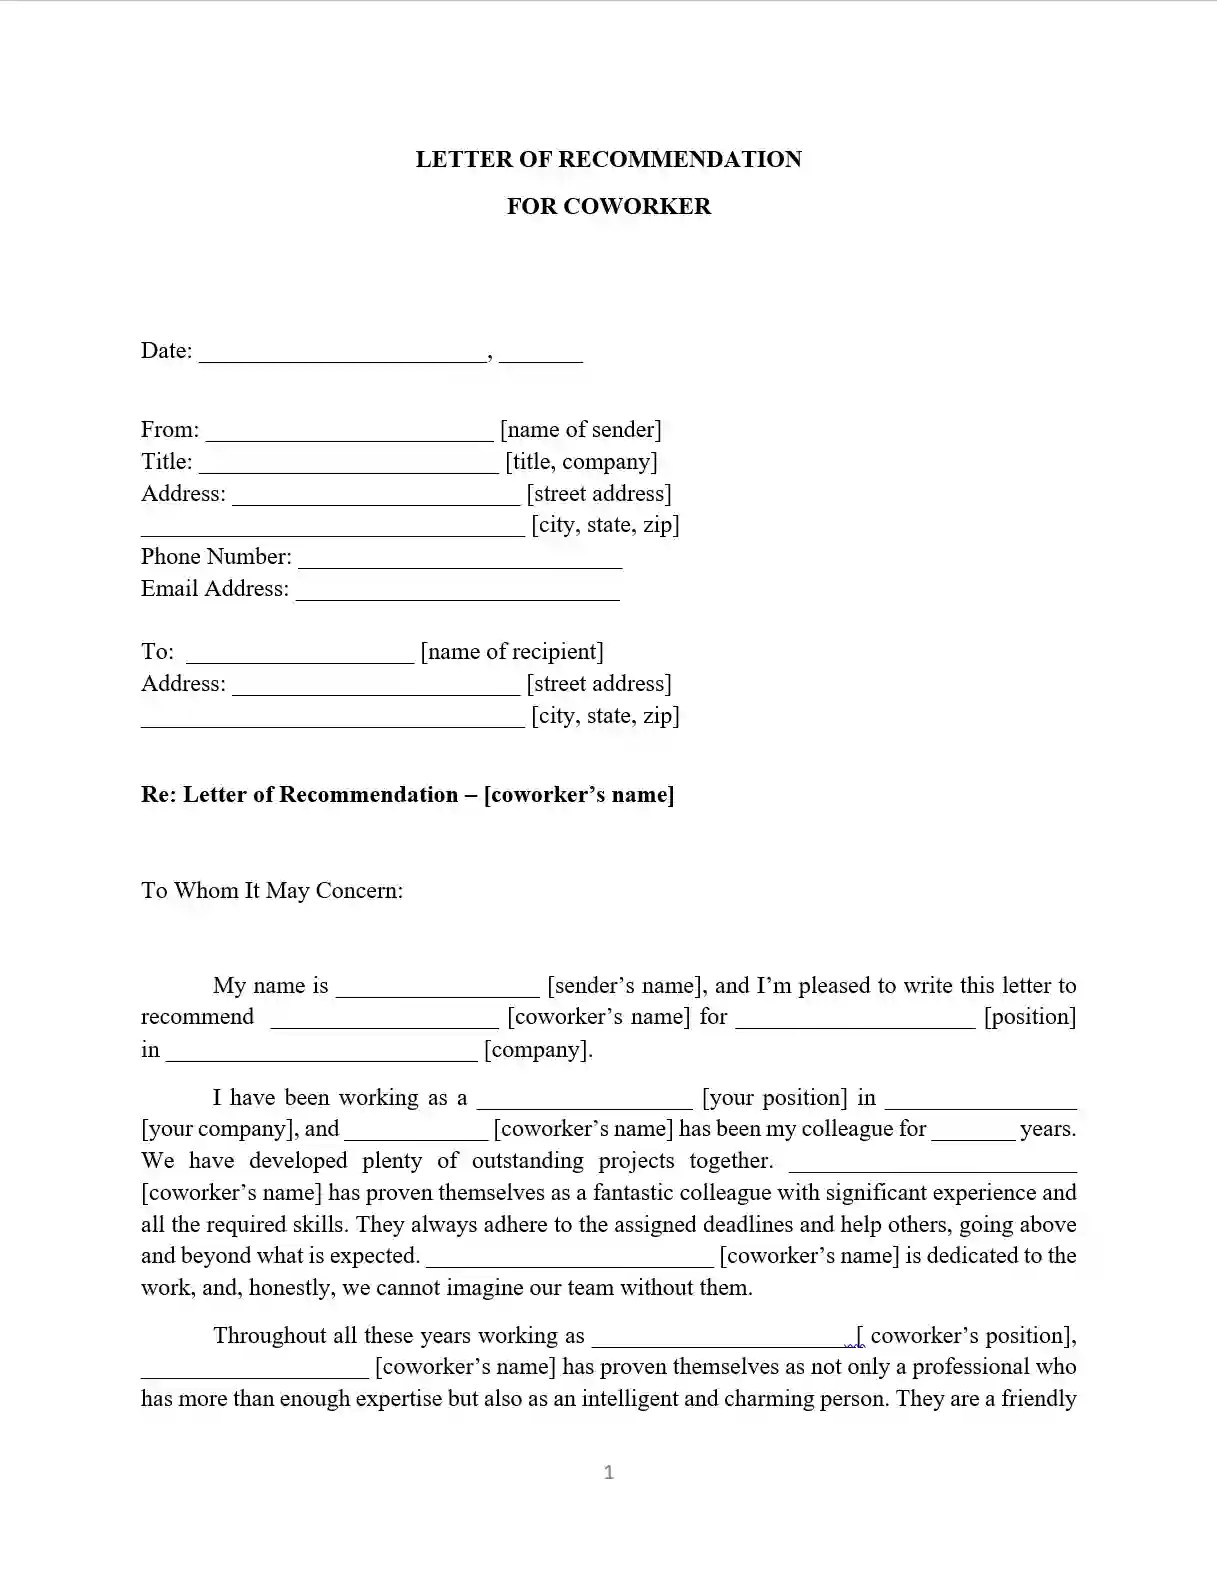 Professional Coworker Letter Of Recommendation Template